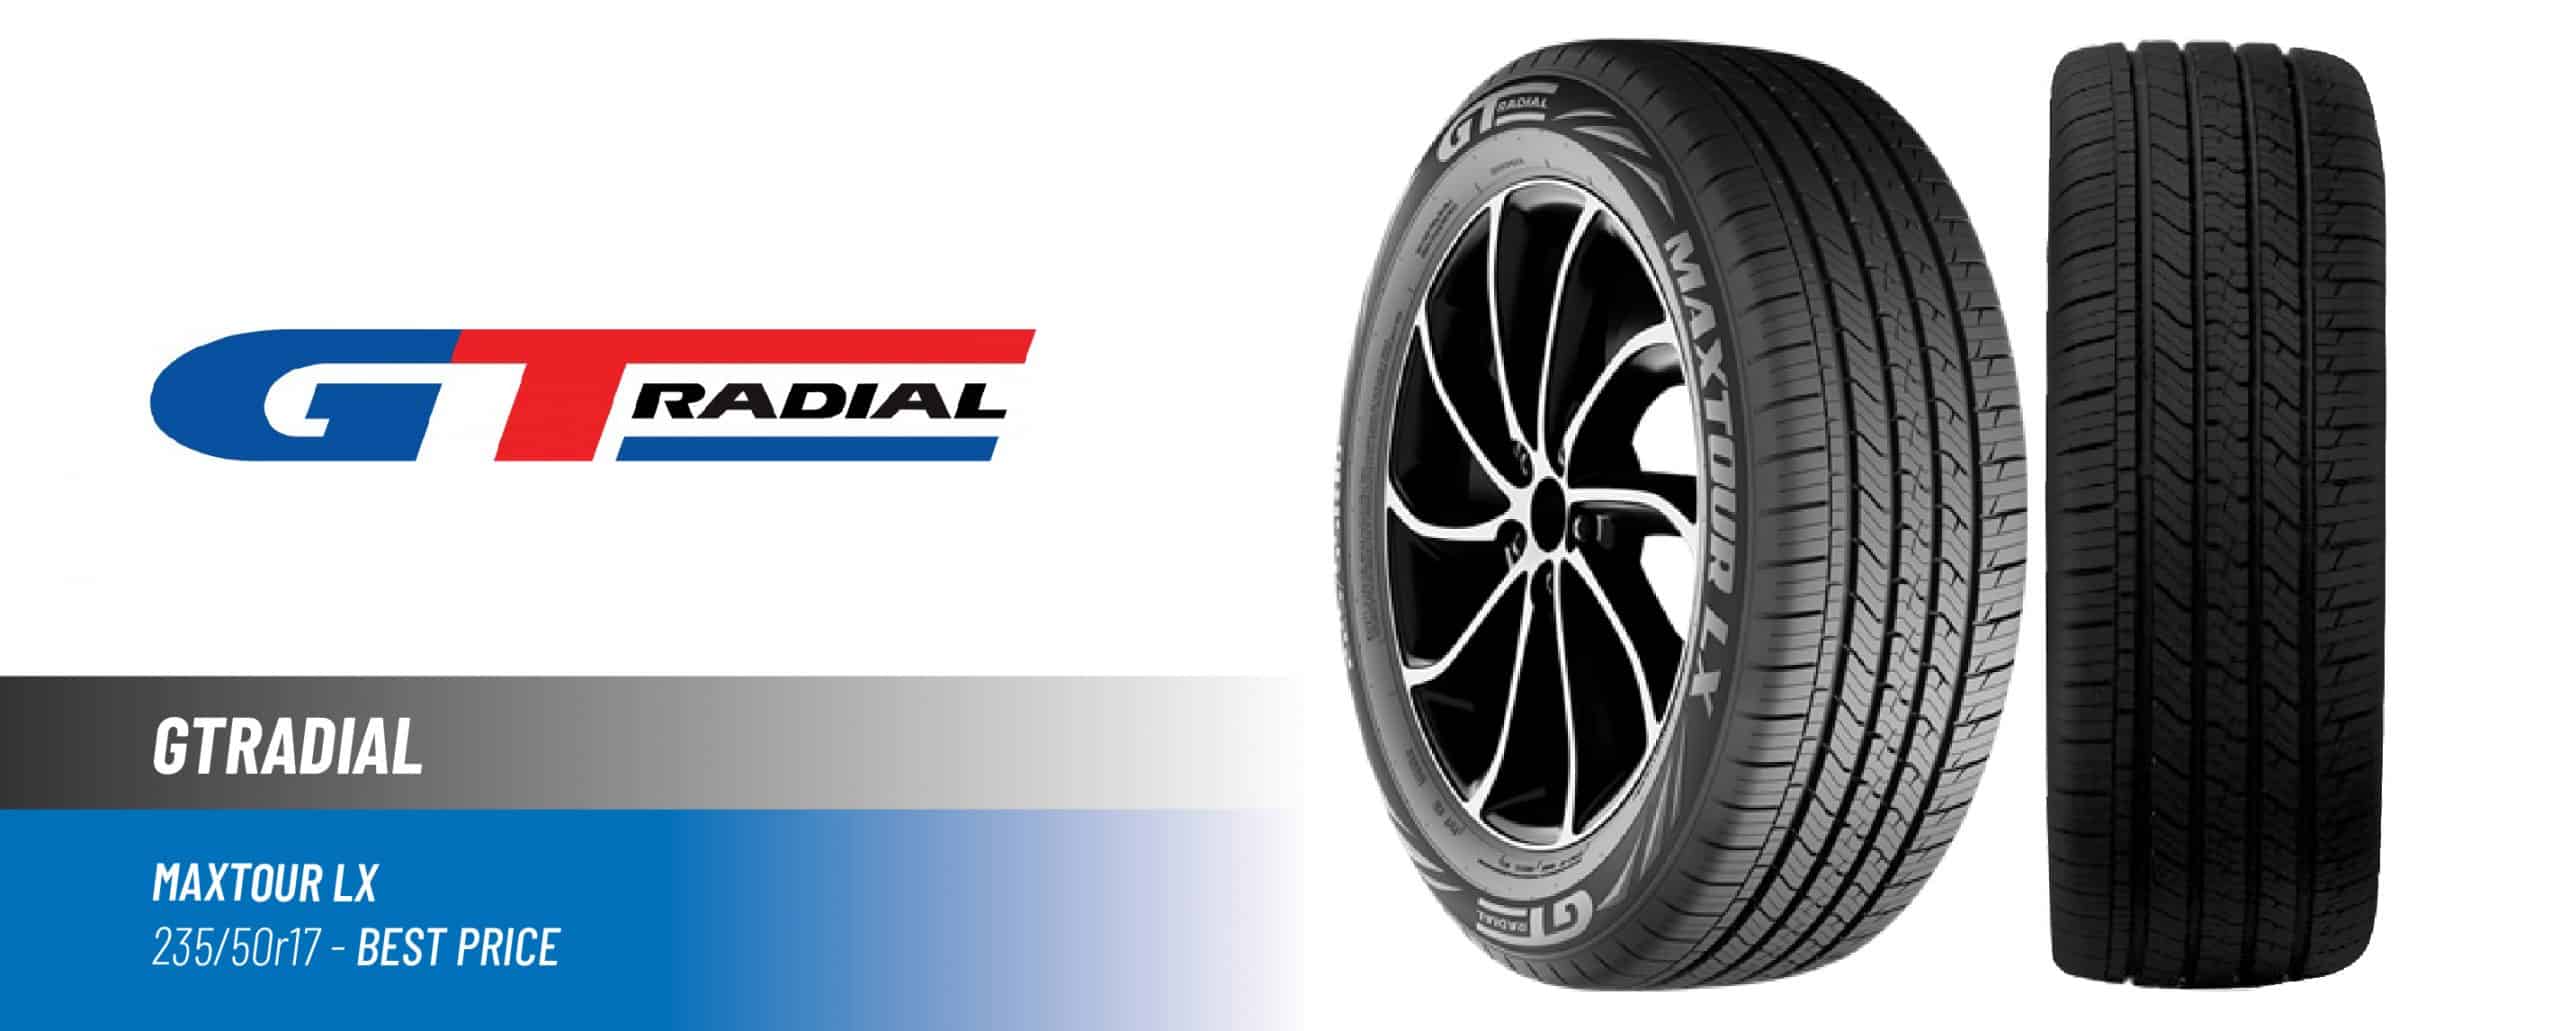 Top#2 Best Price: GTRadial Maxtour LX – 235/50 R17